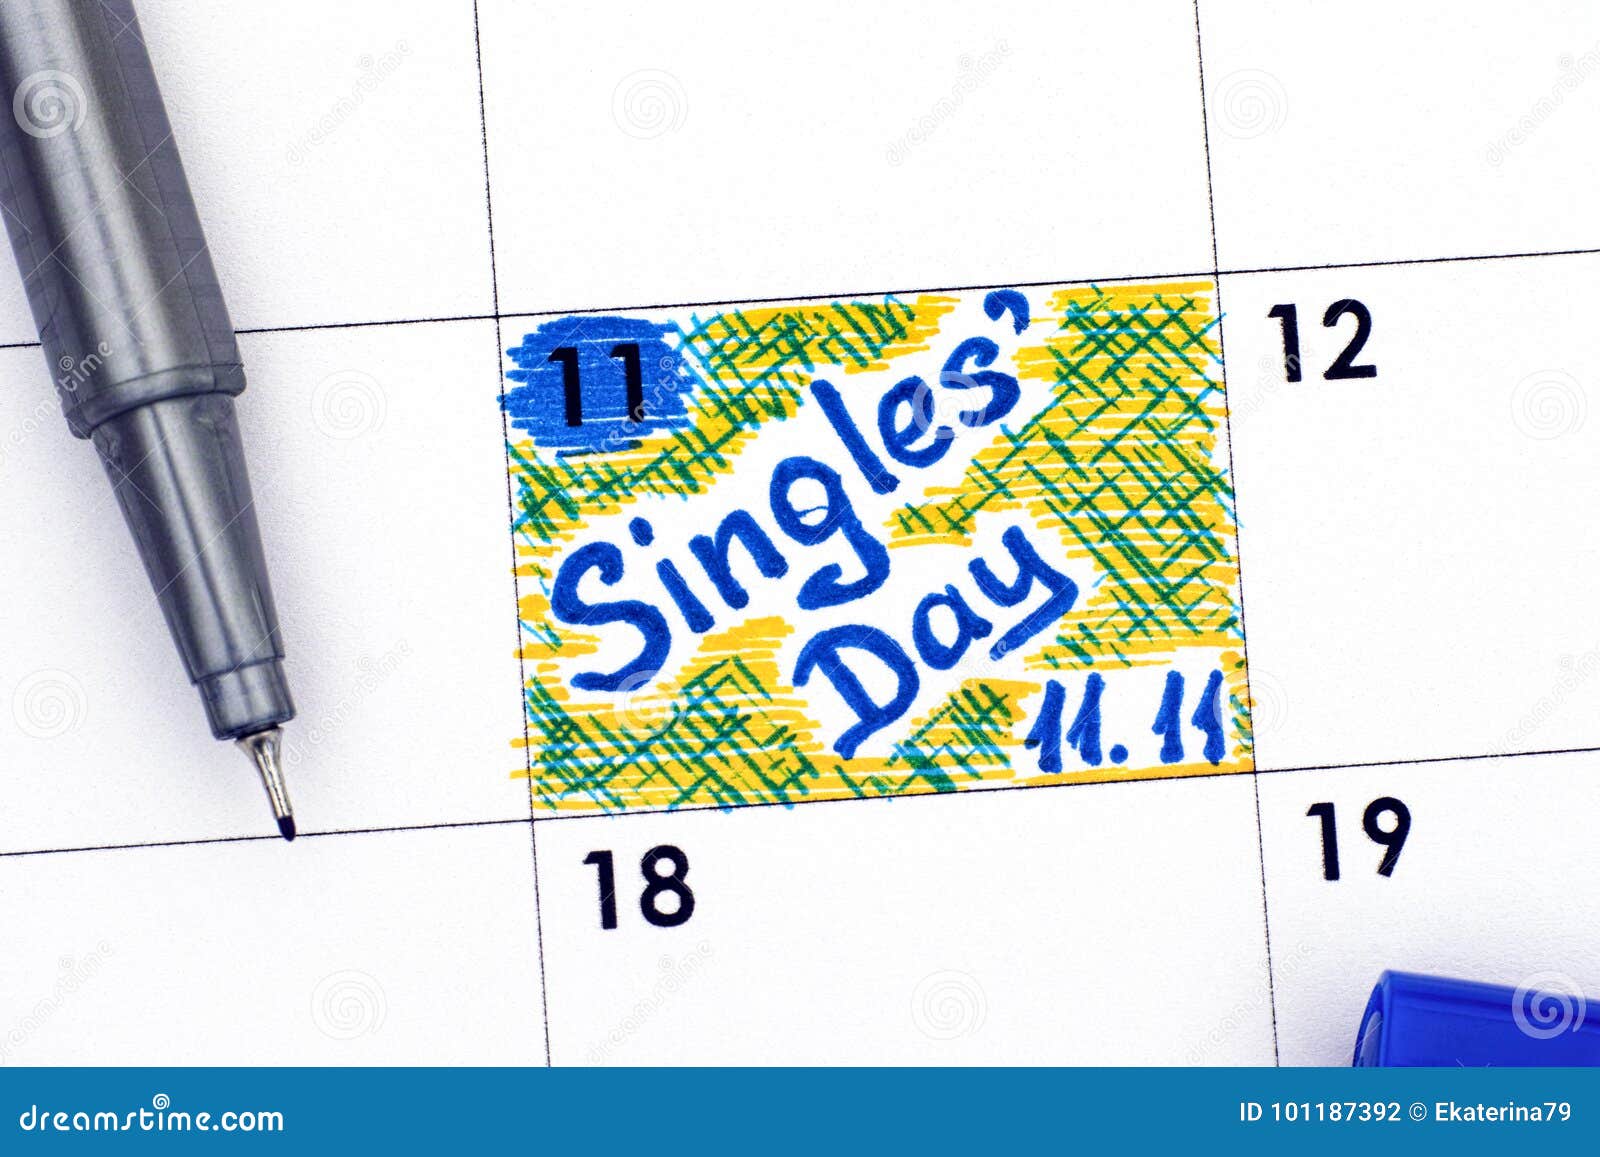 Reminder Singles Day 11.11 in Calendar with Blue Pen Stock Photo